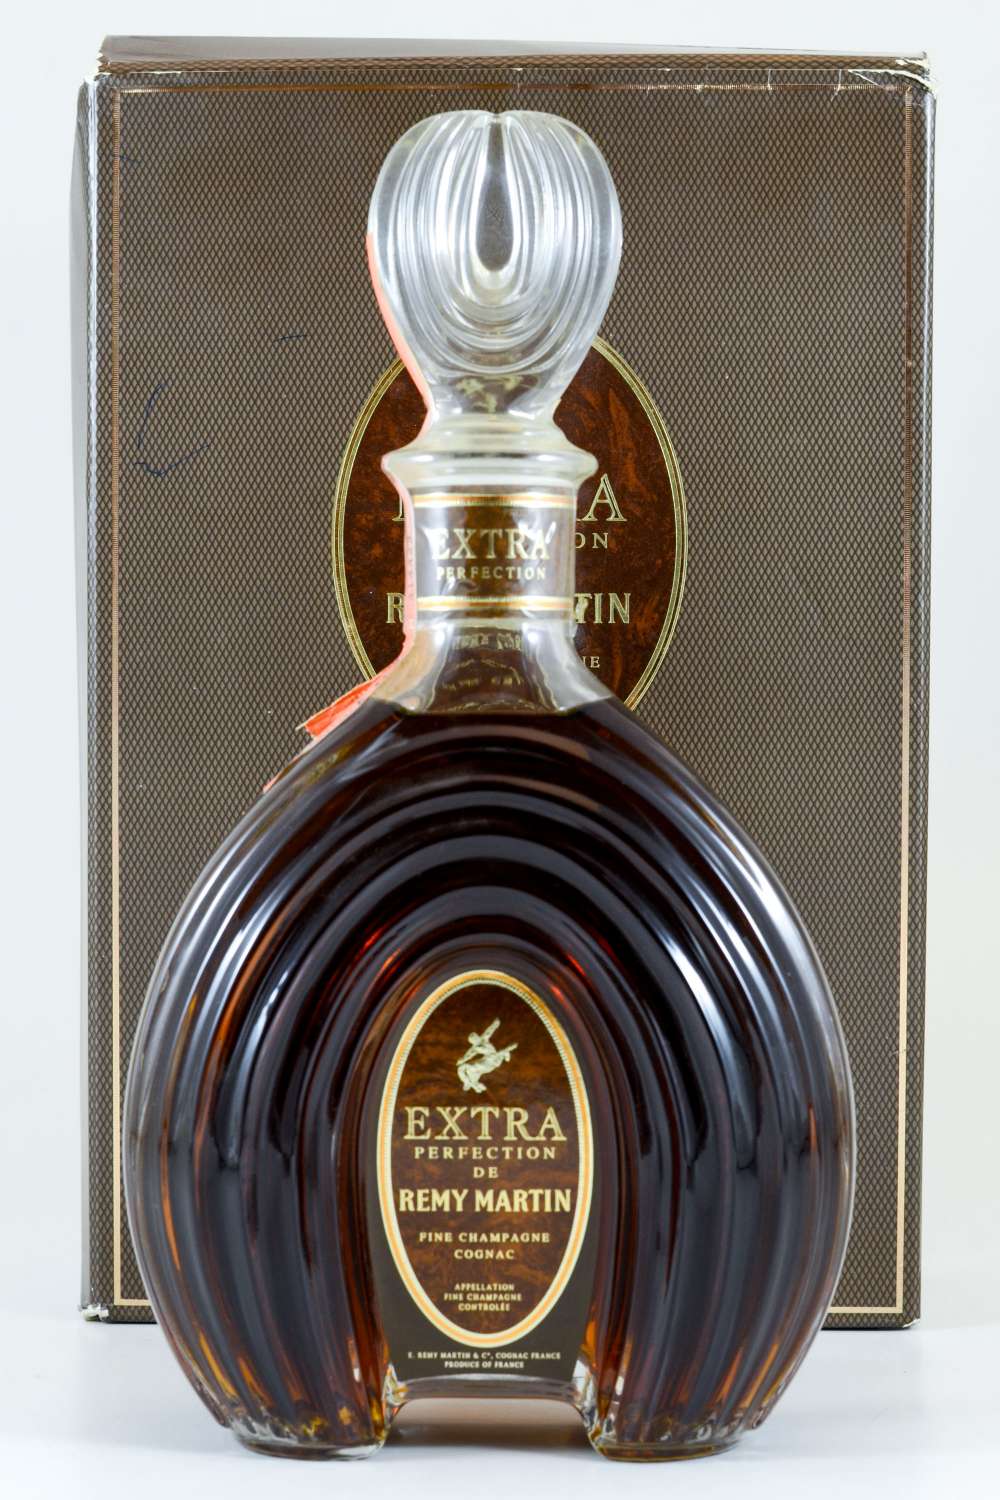 Whisky Network - COGNAC REMY MARTIN EXTRA PERFECTION